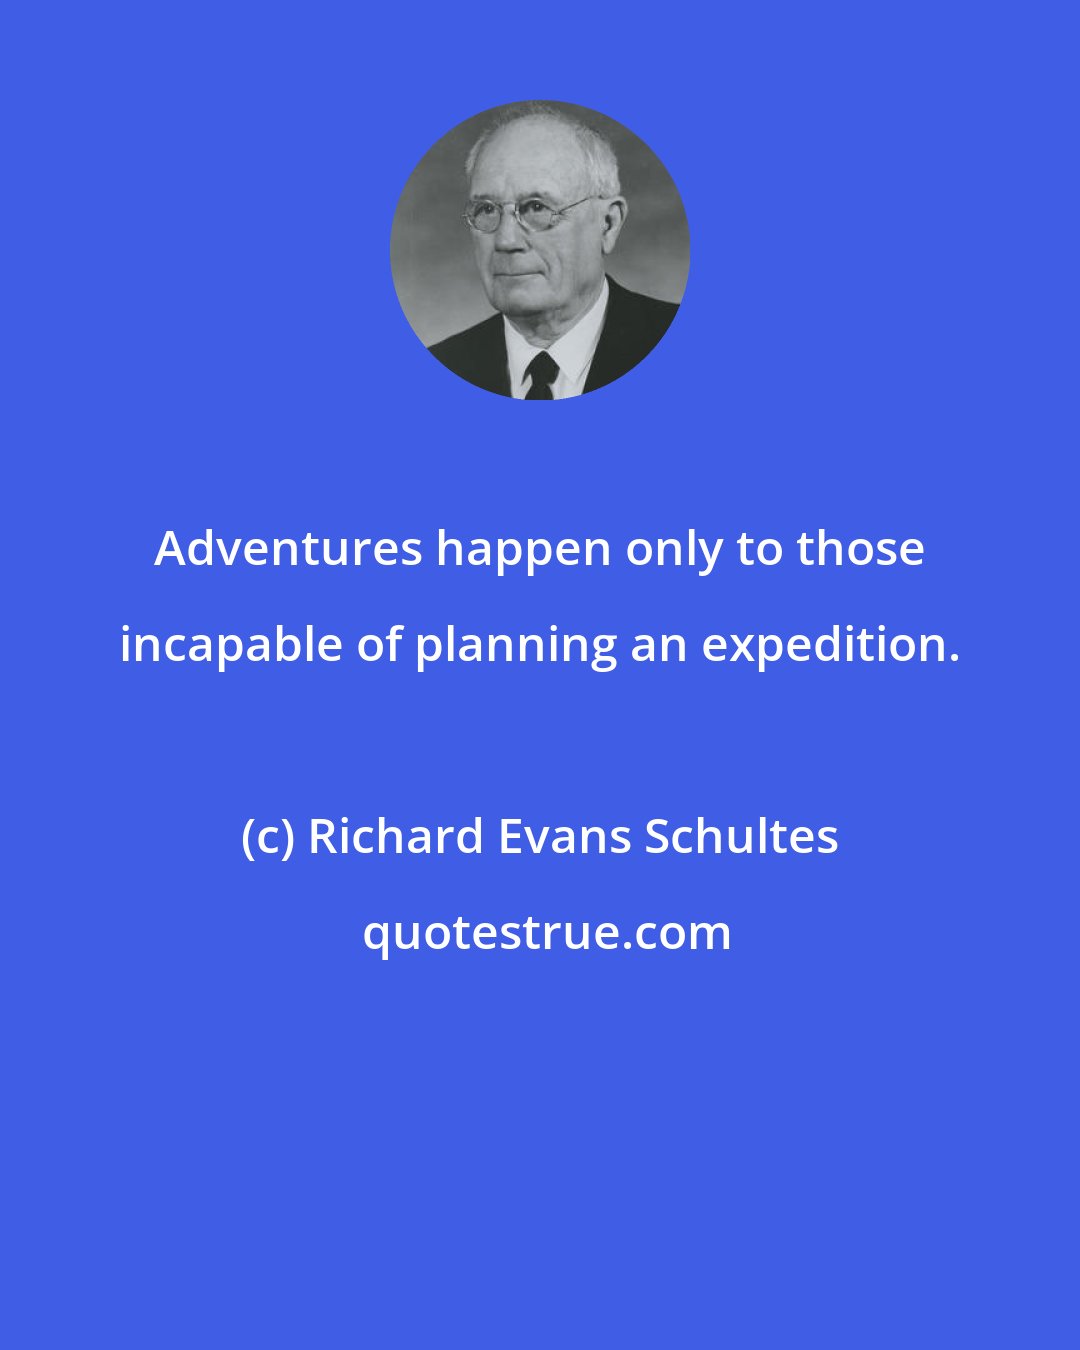 Richard Evans Schultes: Adventures happen only to those incapable of planning an expedition.